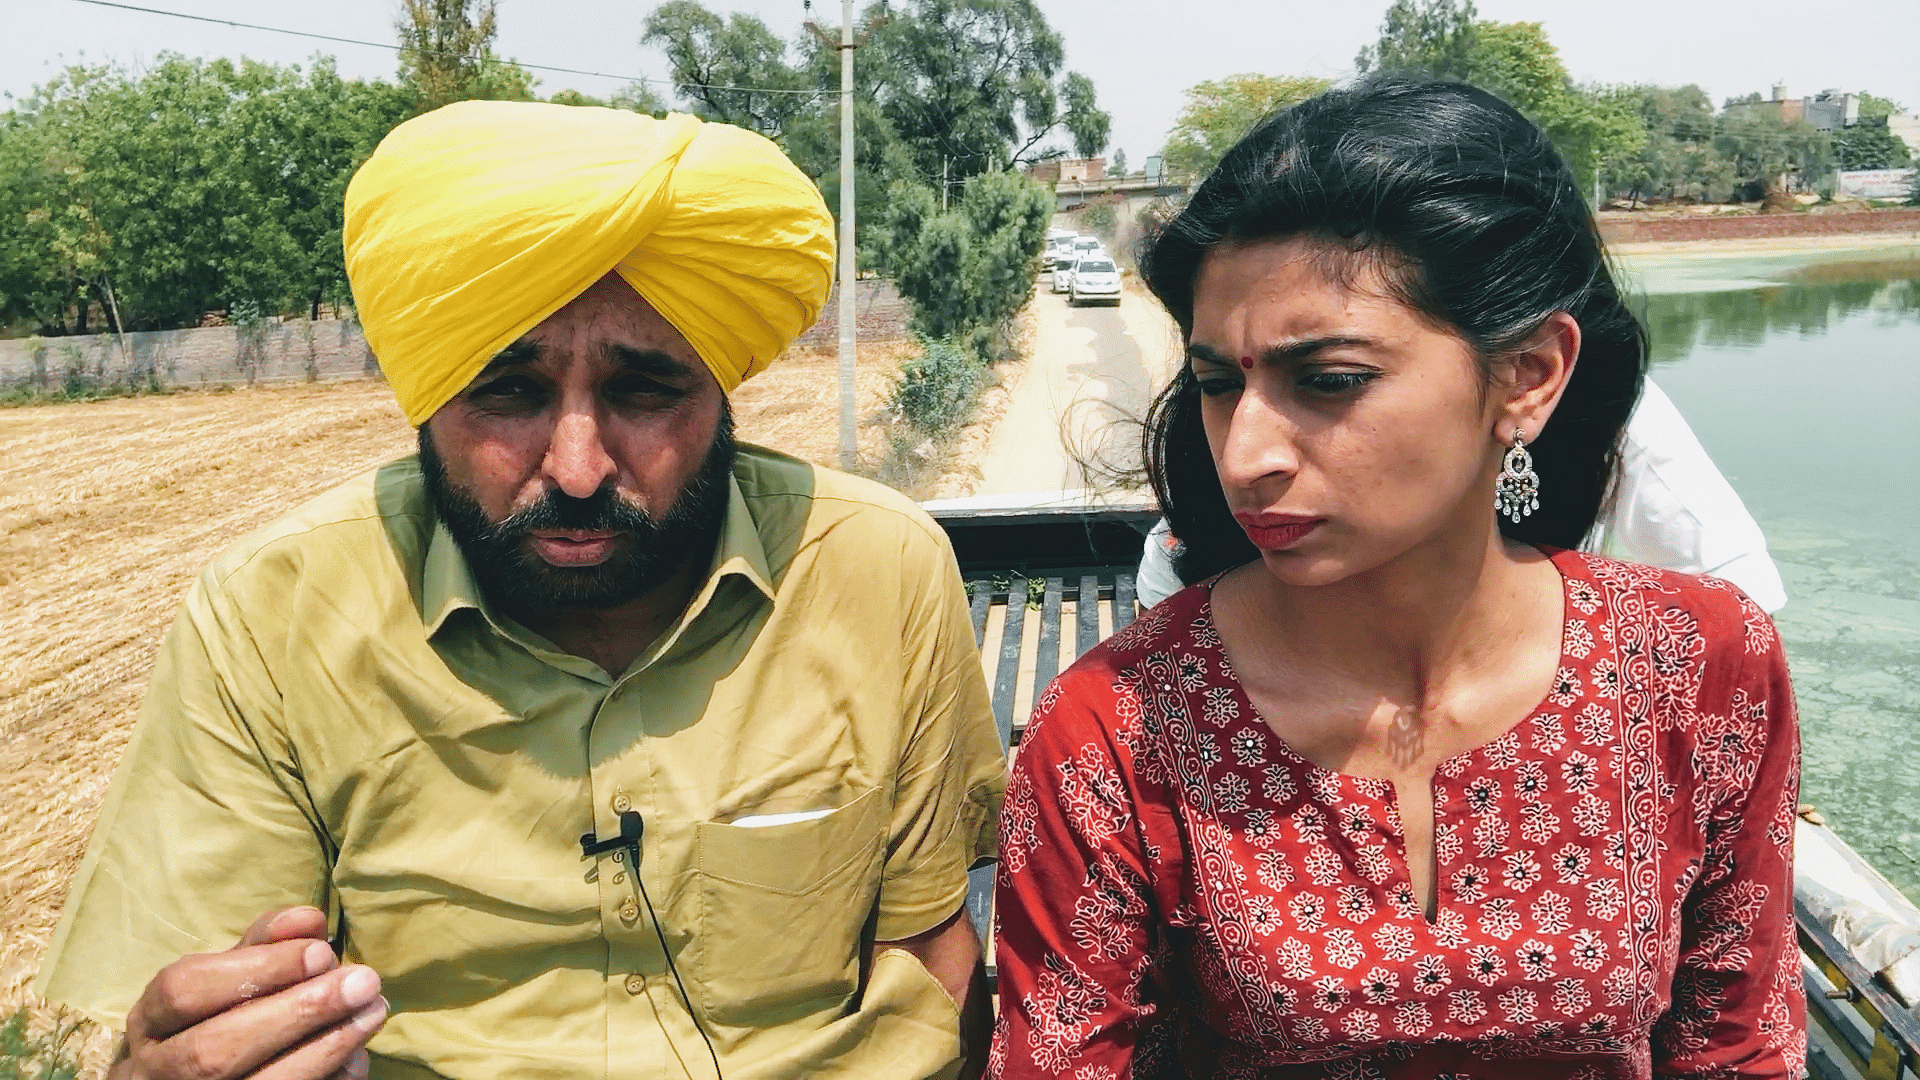 With Lok Sabha 2019 polls entering its last phase, The Quint reached Punjab’s Sangrur district to meet sitting AAP MP Bhagwant Mann who is not only defending his seat but also AAP riddled with factionalism and MLAs leaving.